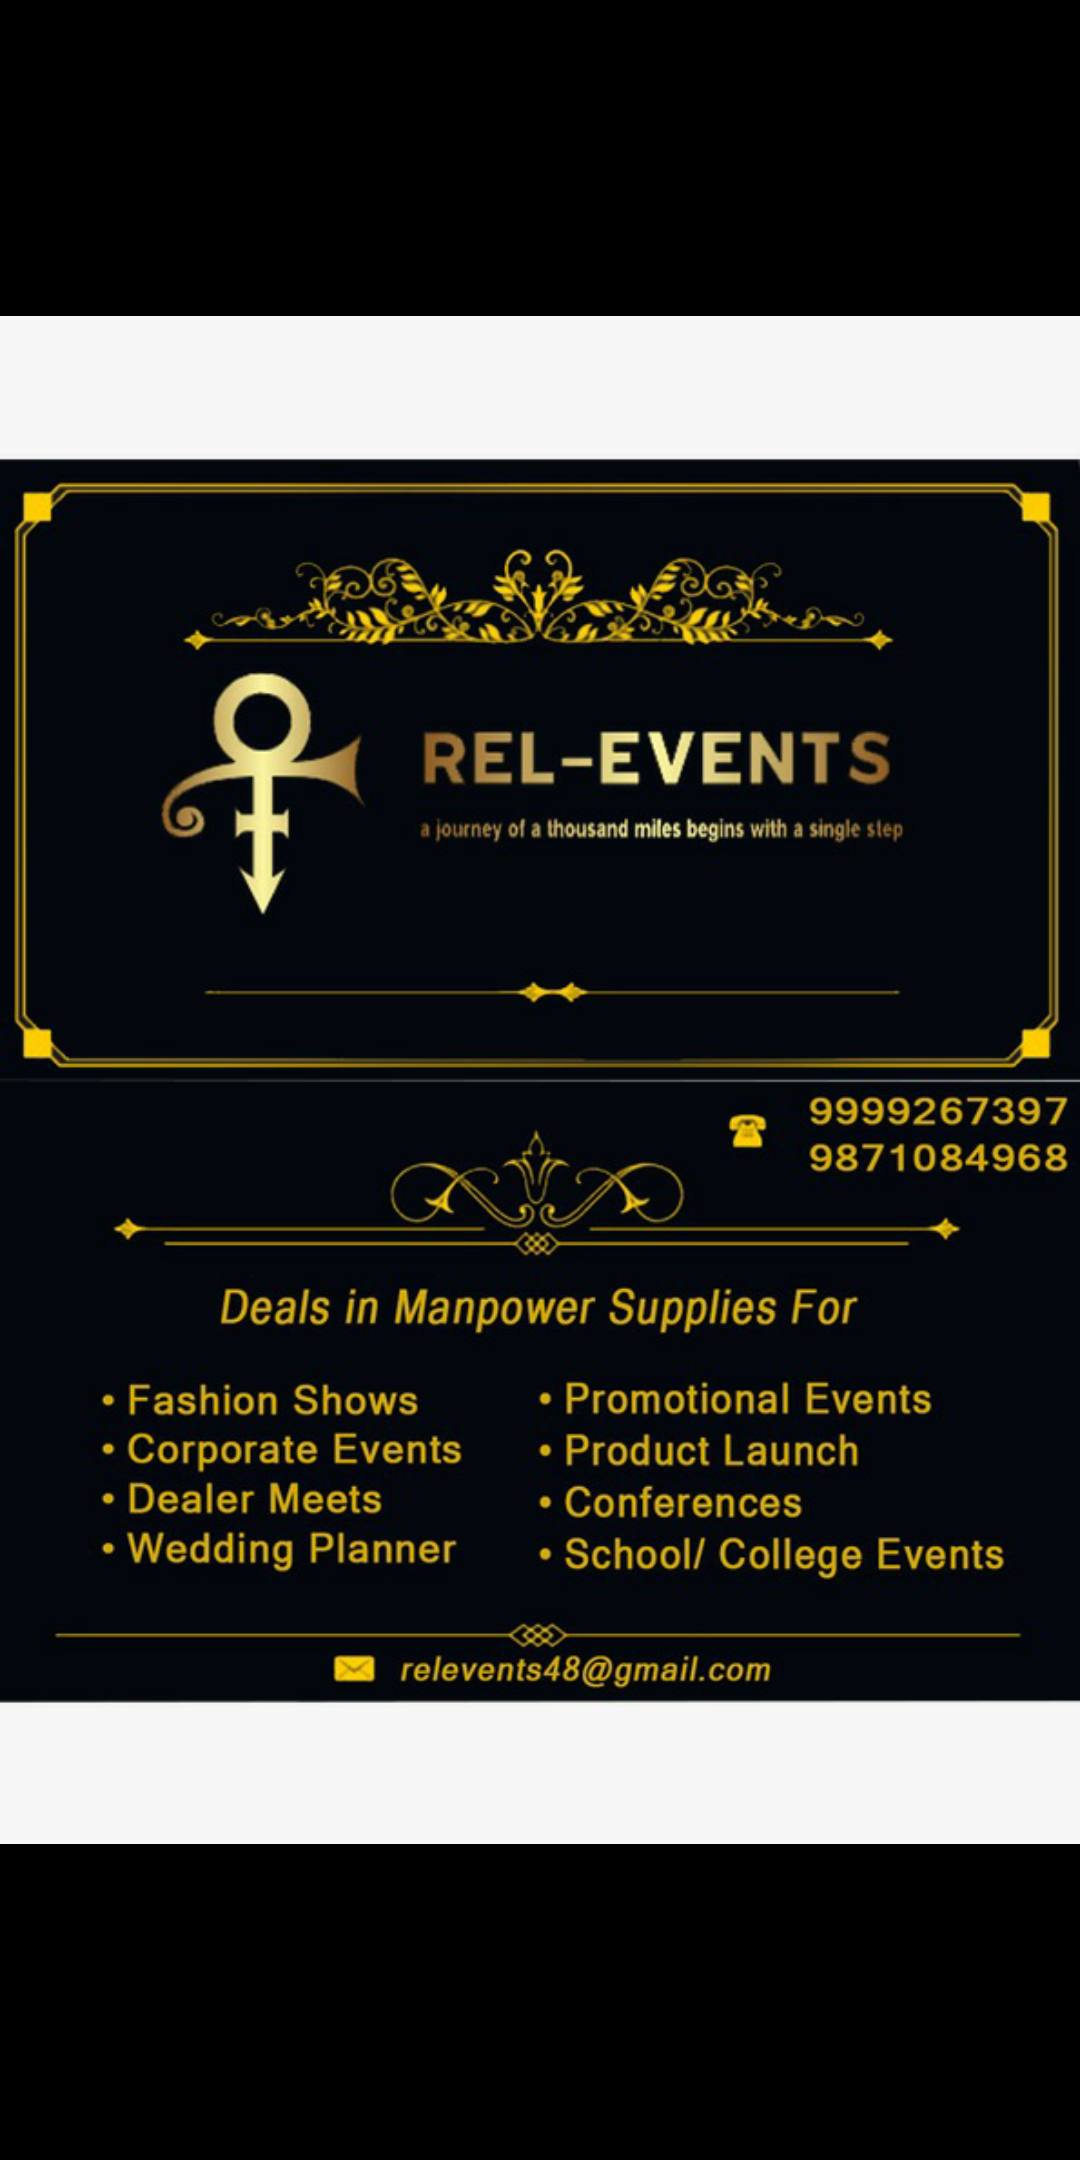 Rel-Events